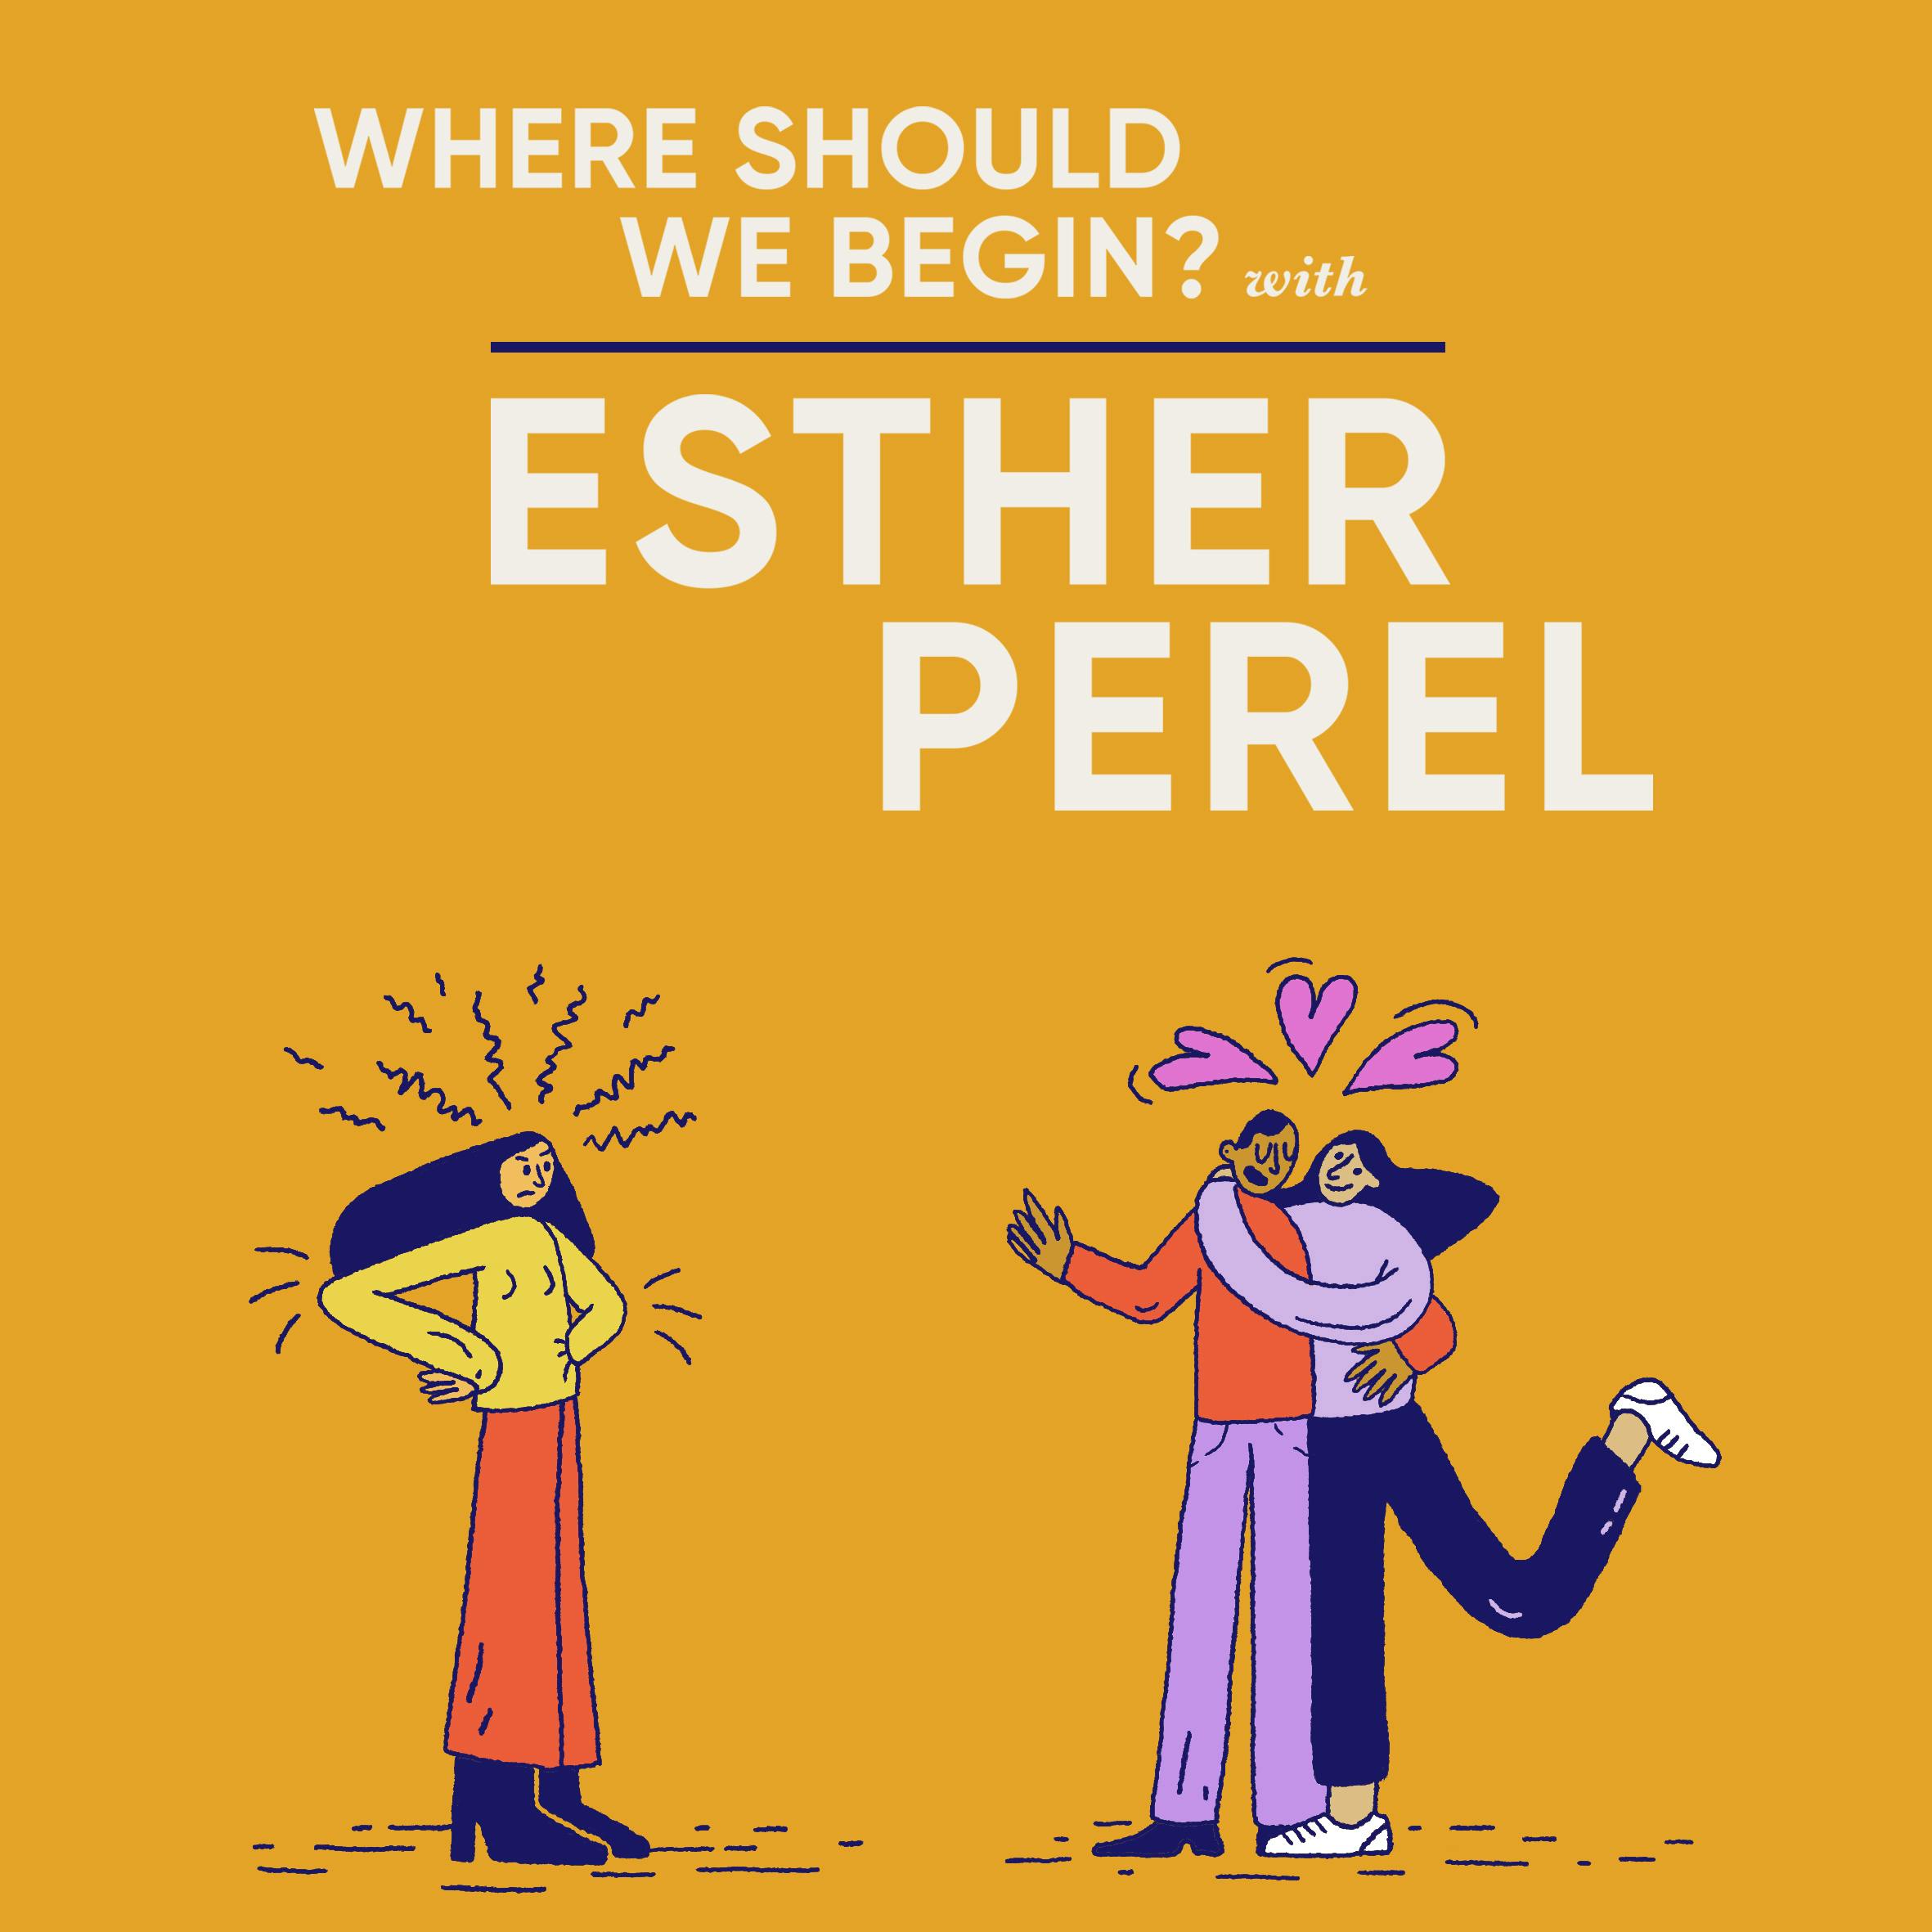 Esther Calling - My Brother's Wife Ruined Our Relationship by Esther Perel Global Media